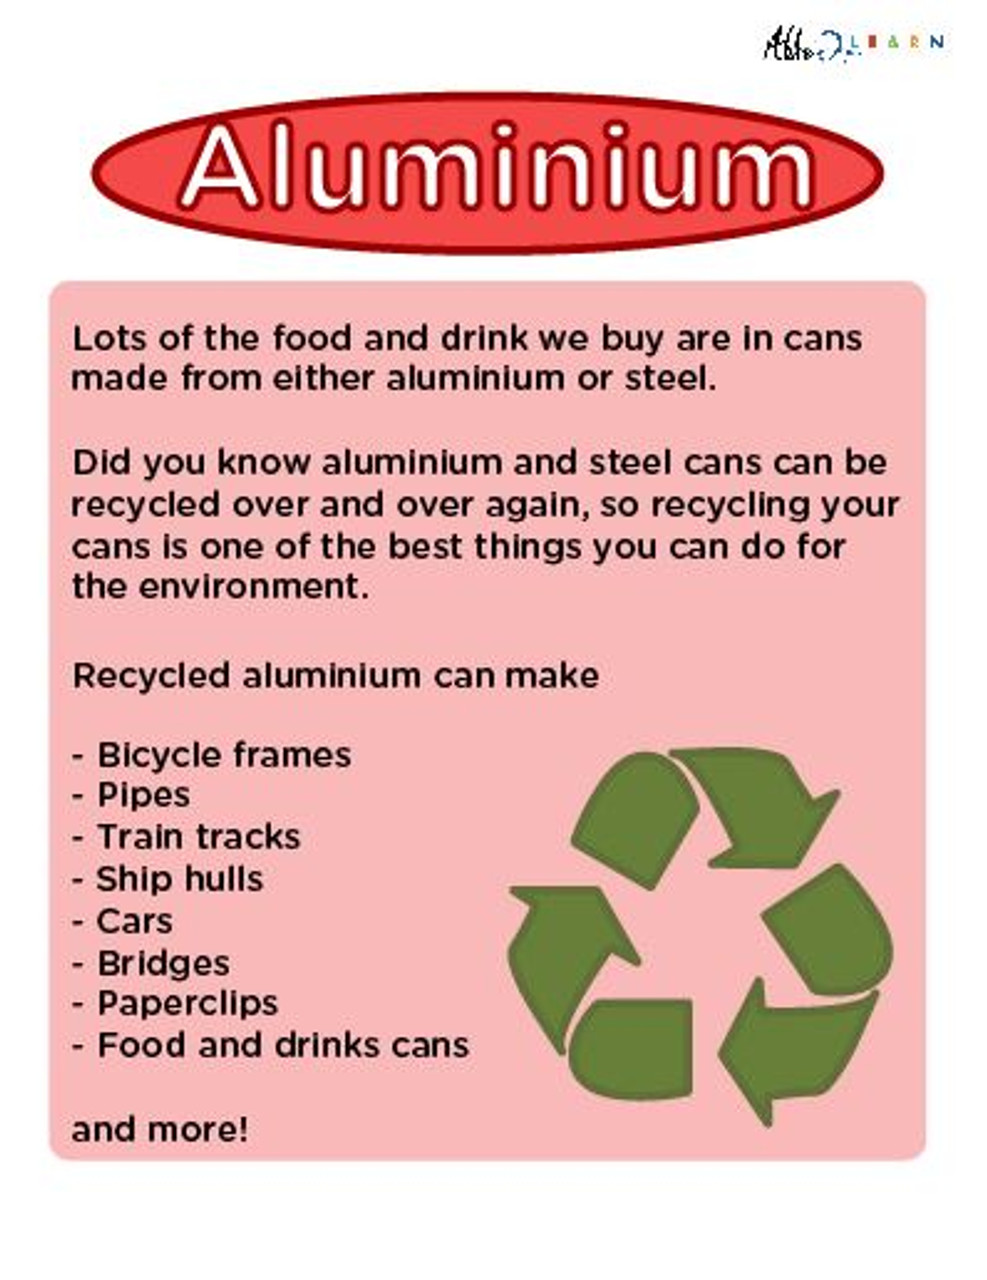 Facts about aluminium